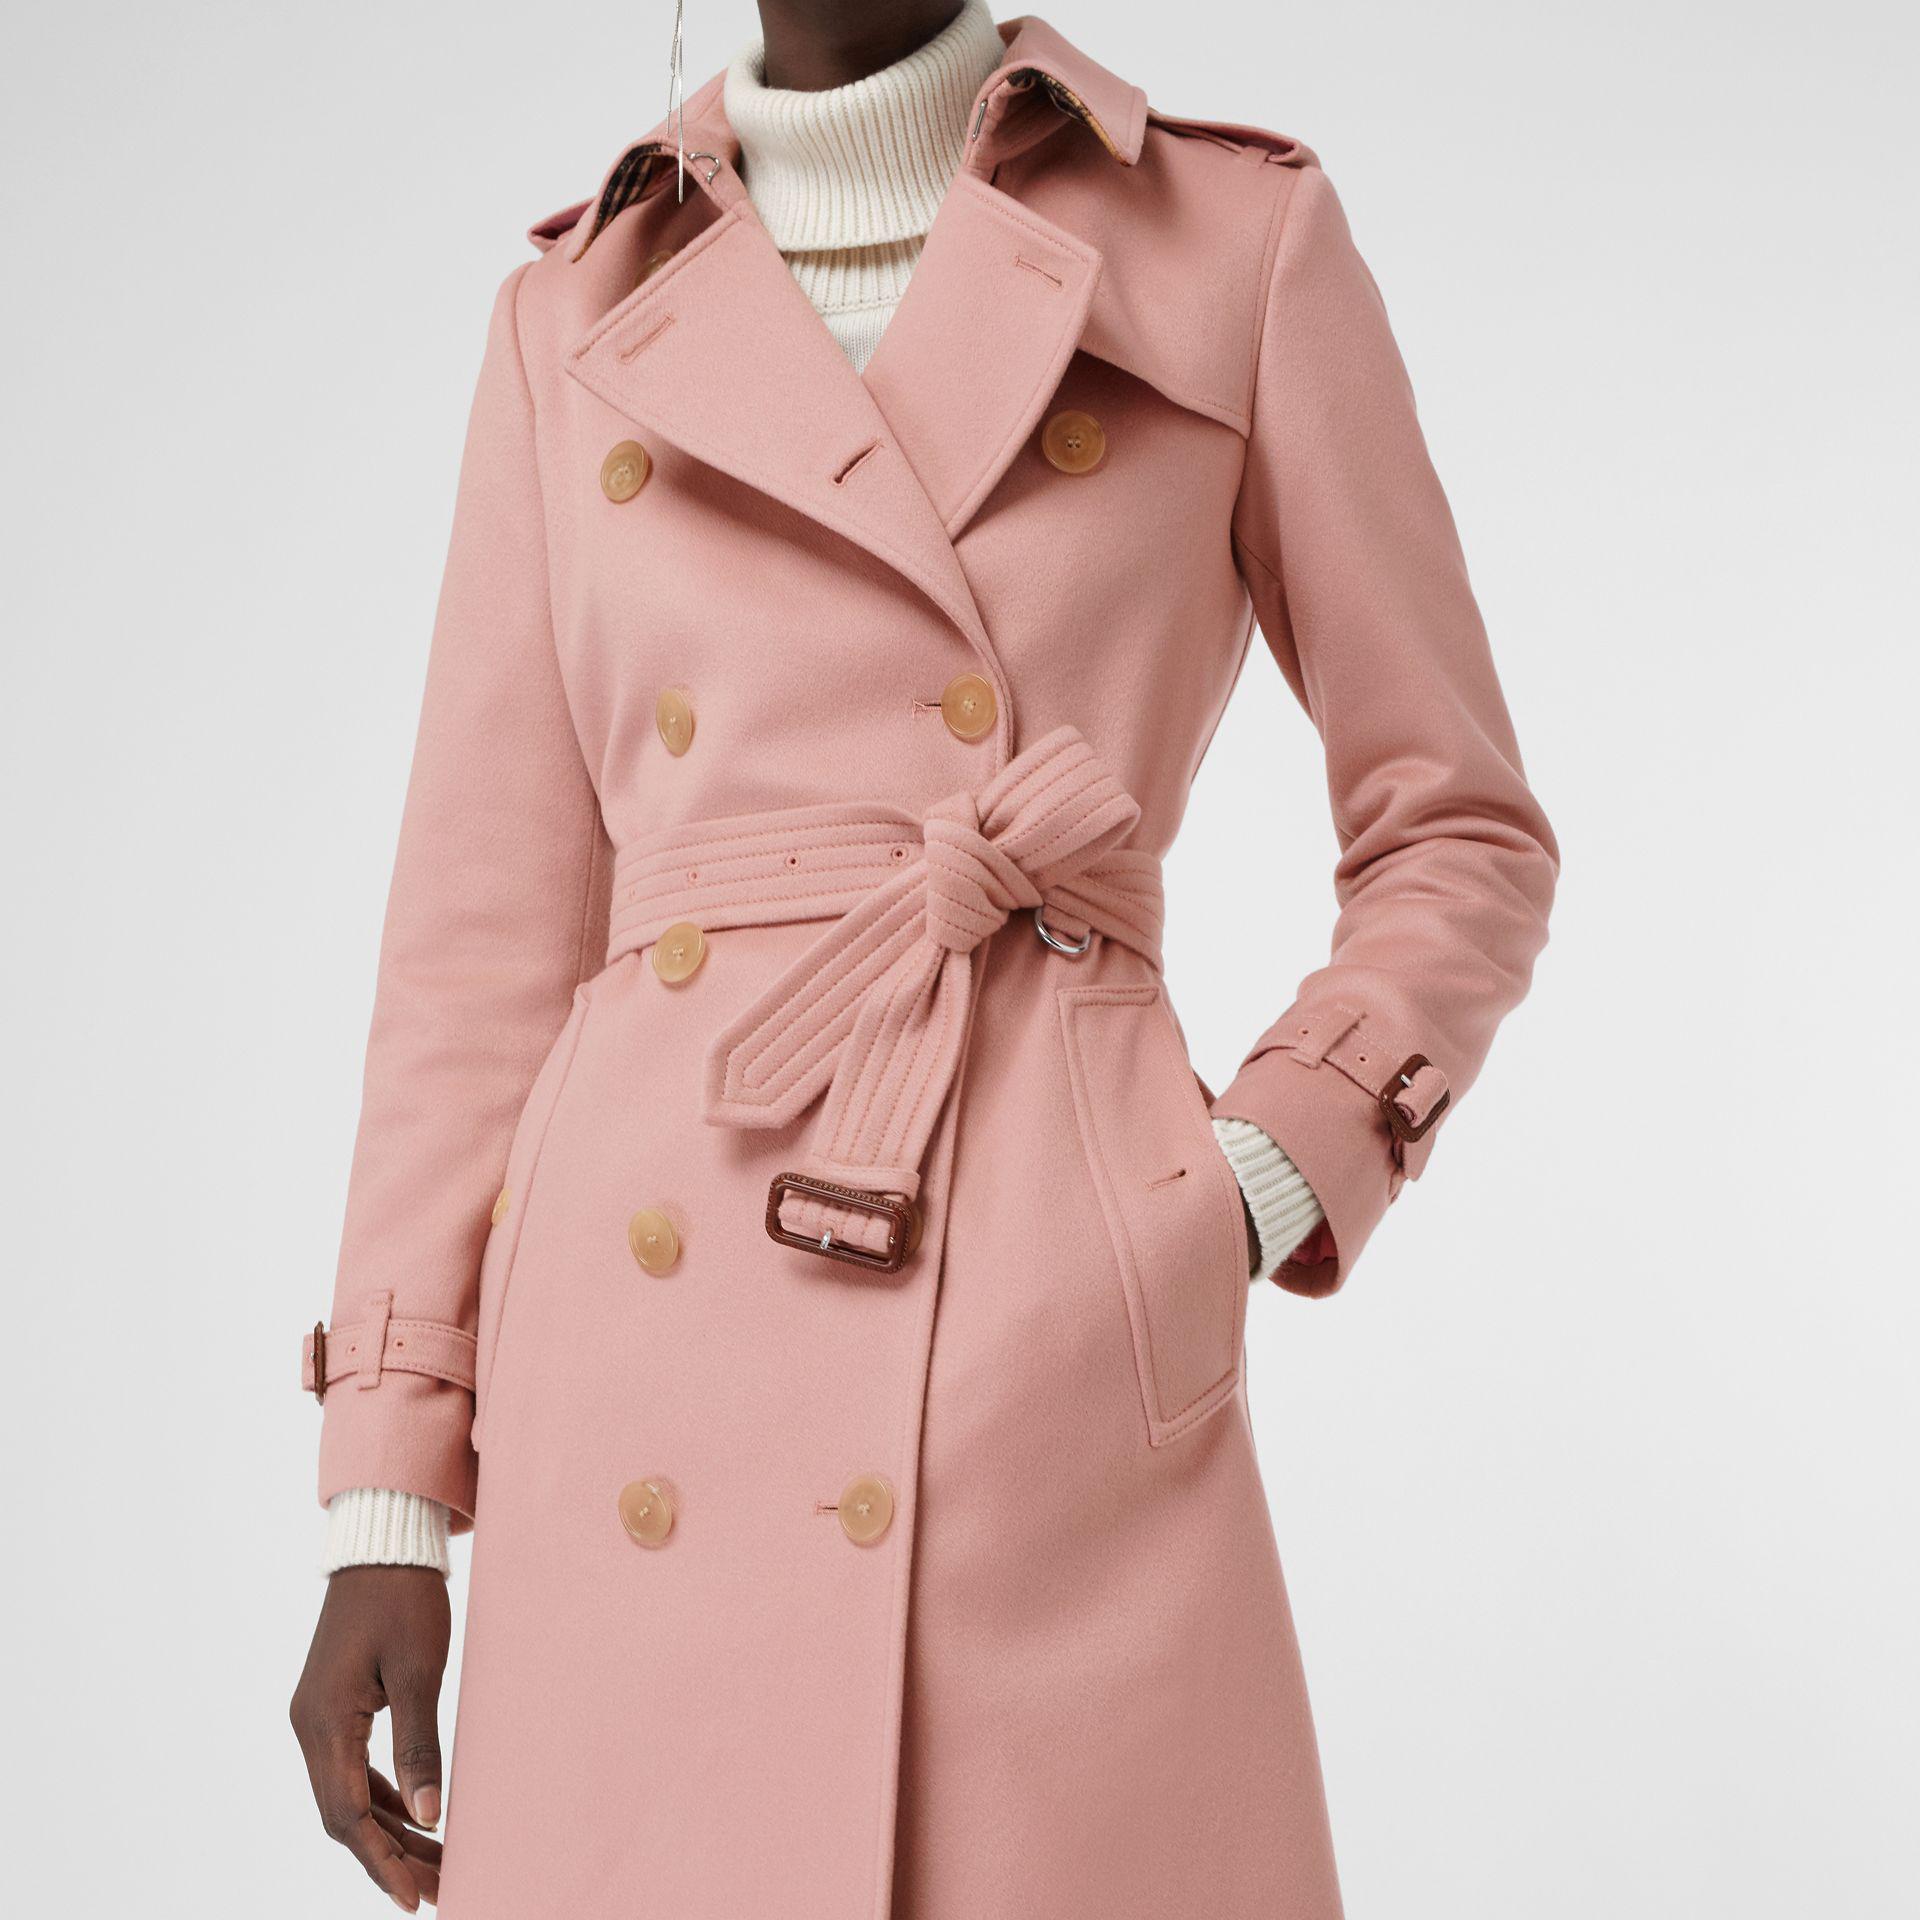 burberry pink coat Online Shopping for Women, Men, Kids Fashion &  Lifestyle|Free Delivery & Returns! -